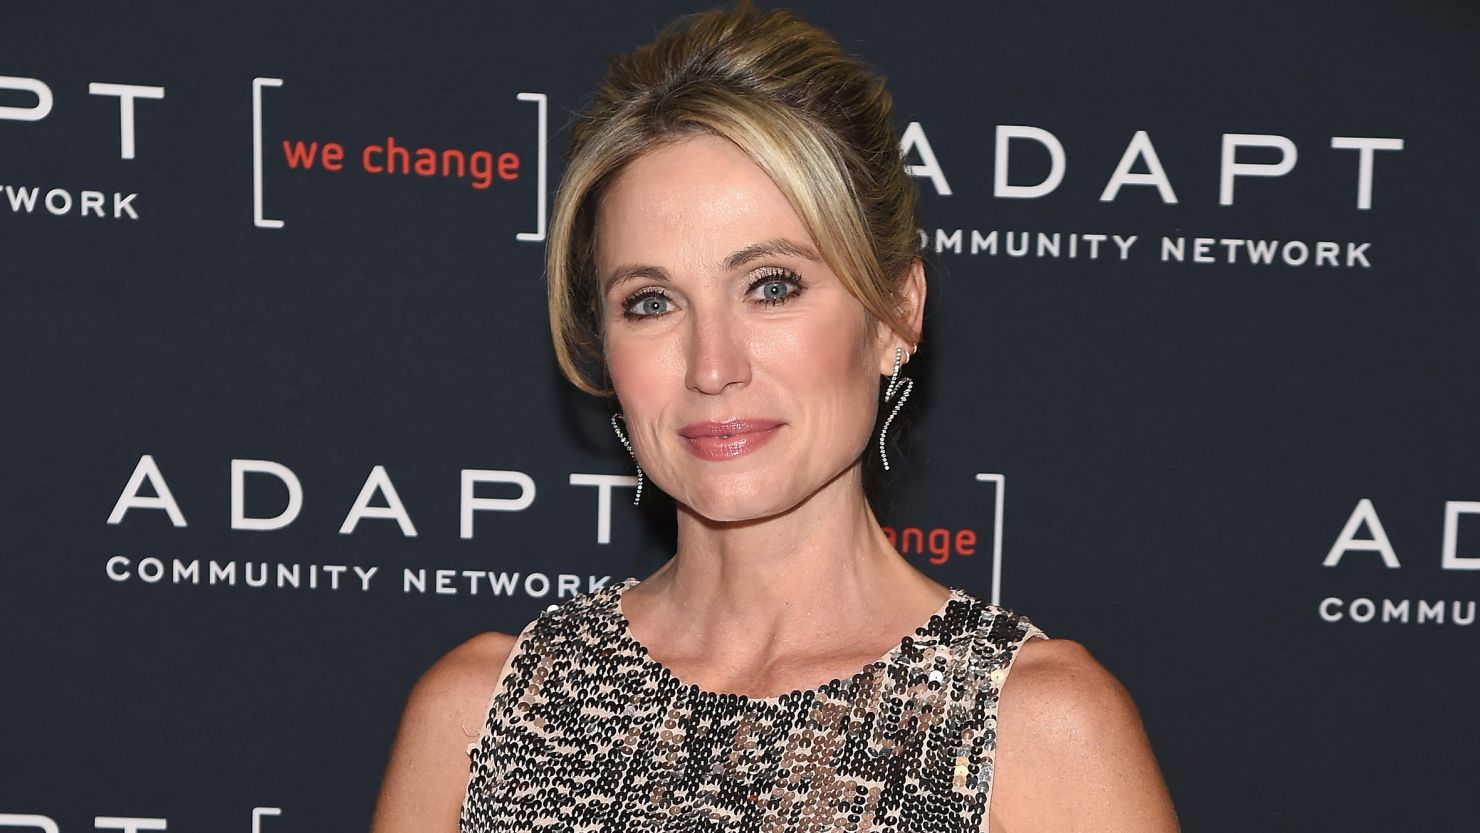 Event honoree, ABC Television reporter Amy Robach attends the 2022 ADAPT Leadership Awards gala at Cipriani 42nd Street on March 10, 2022 in New York City.